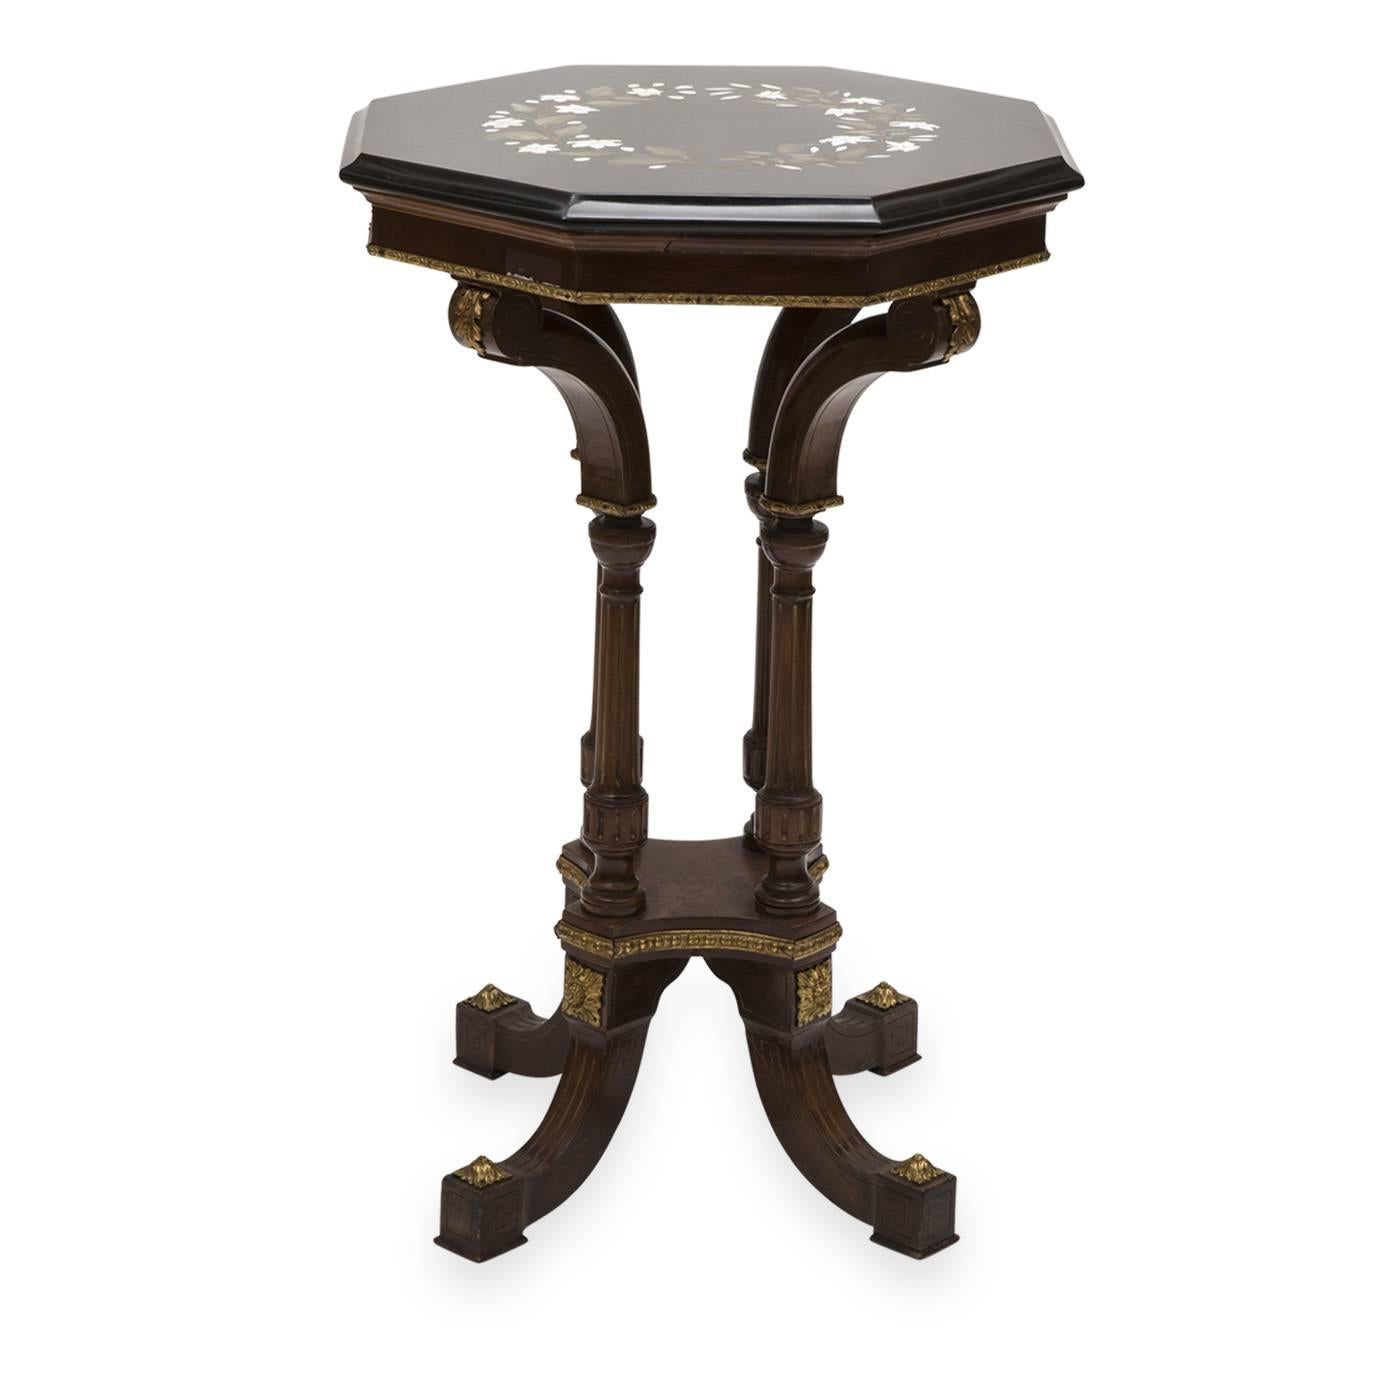 This is a florentine mosaic table in striking black Belgian marble by Traversari Mosaici. This luxurious piece is decorated with a pure white fleur-de-lis garland that evokes a regal presence. The hand-carved wooden table supporting the marble slab